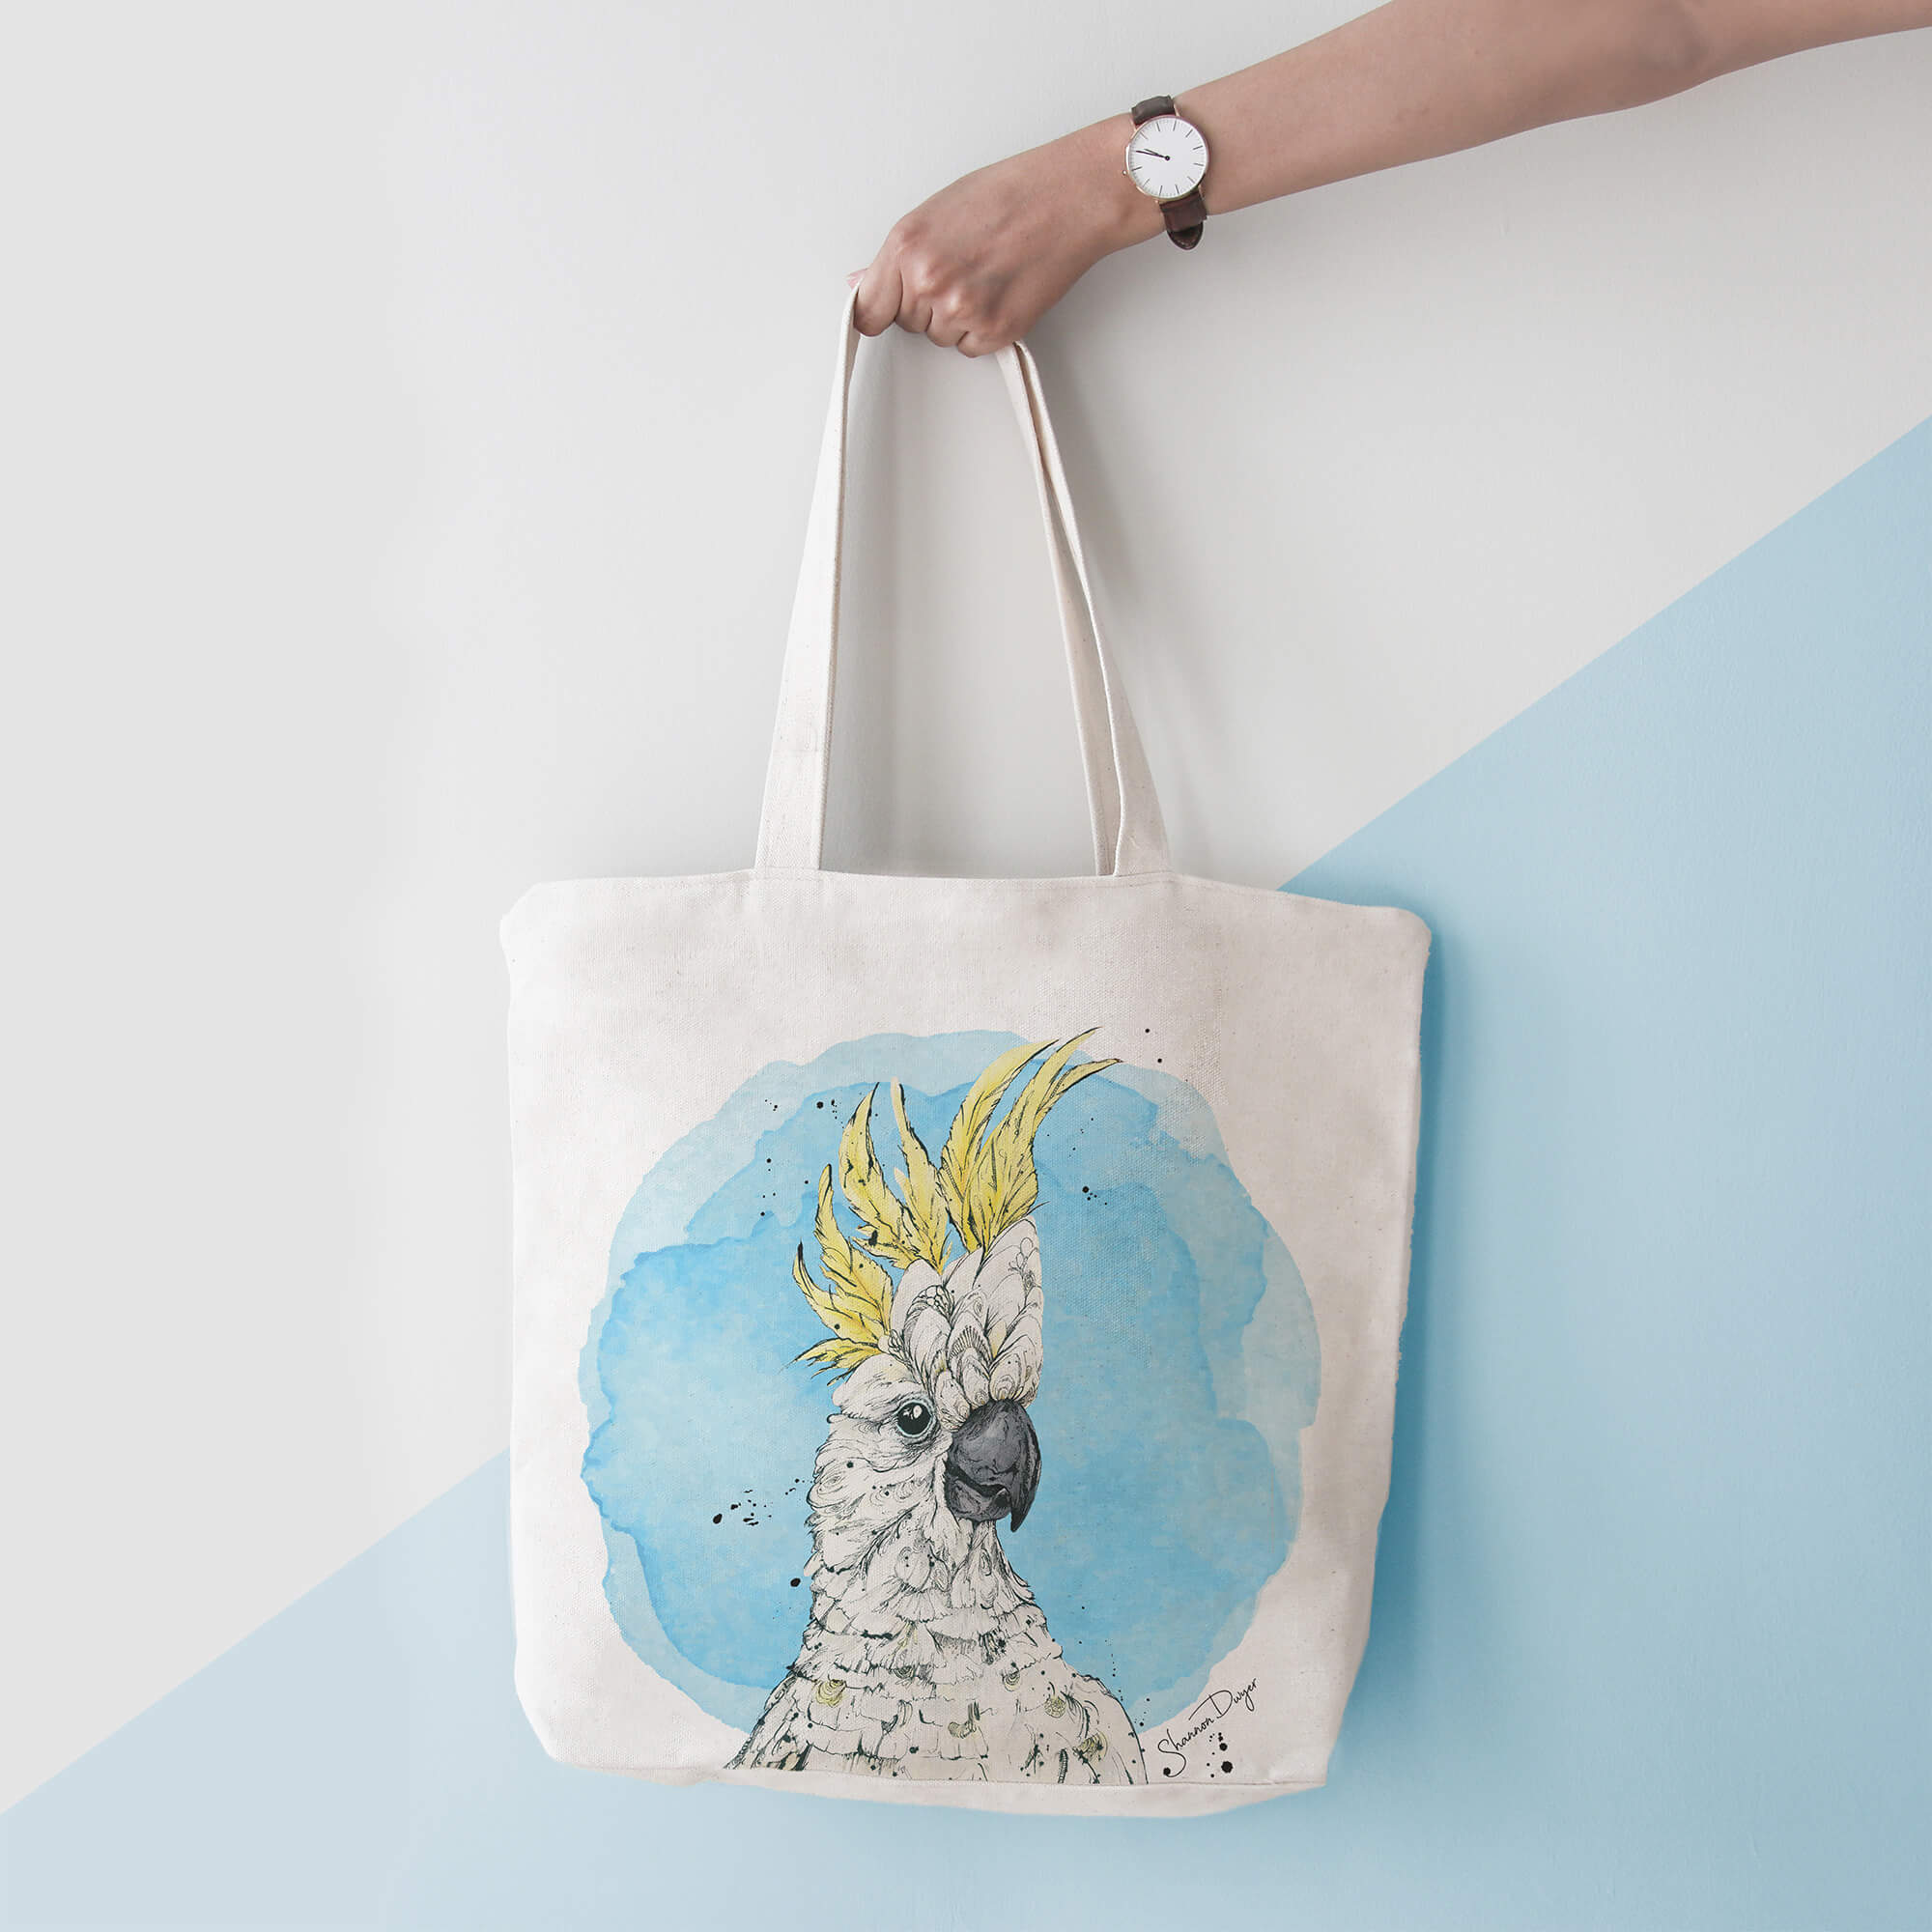 A parrot is printed on a tote bag.